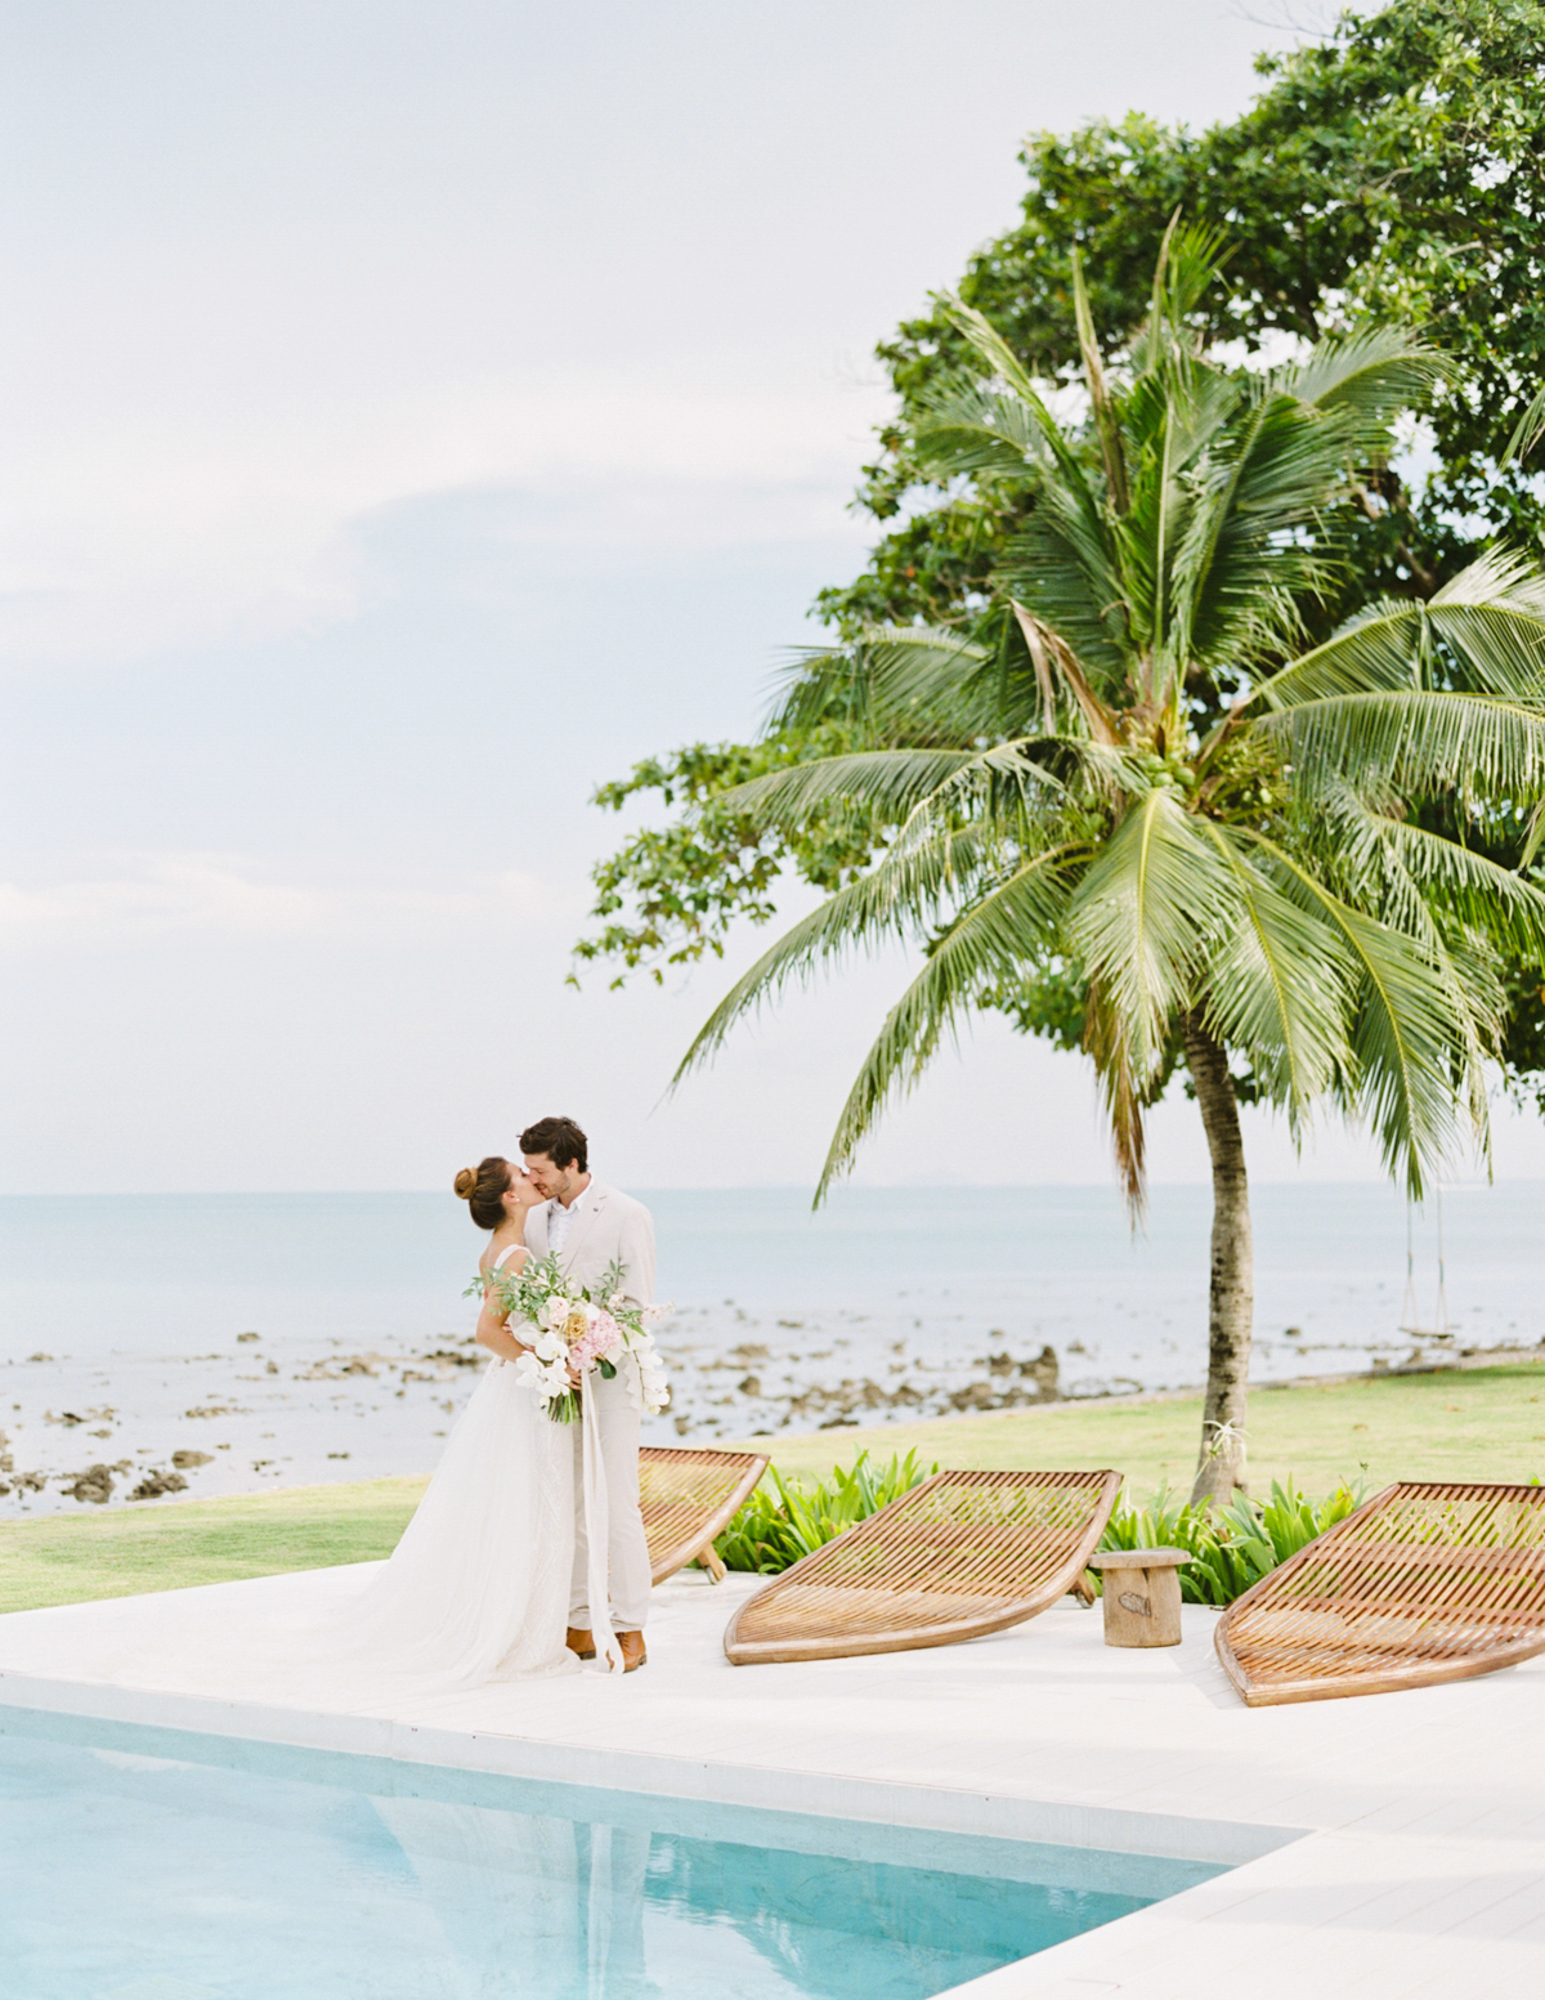 Bride and groom photos for elopement on the luxury island Koh Yao Noi phuket in Thailand